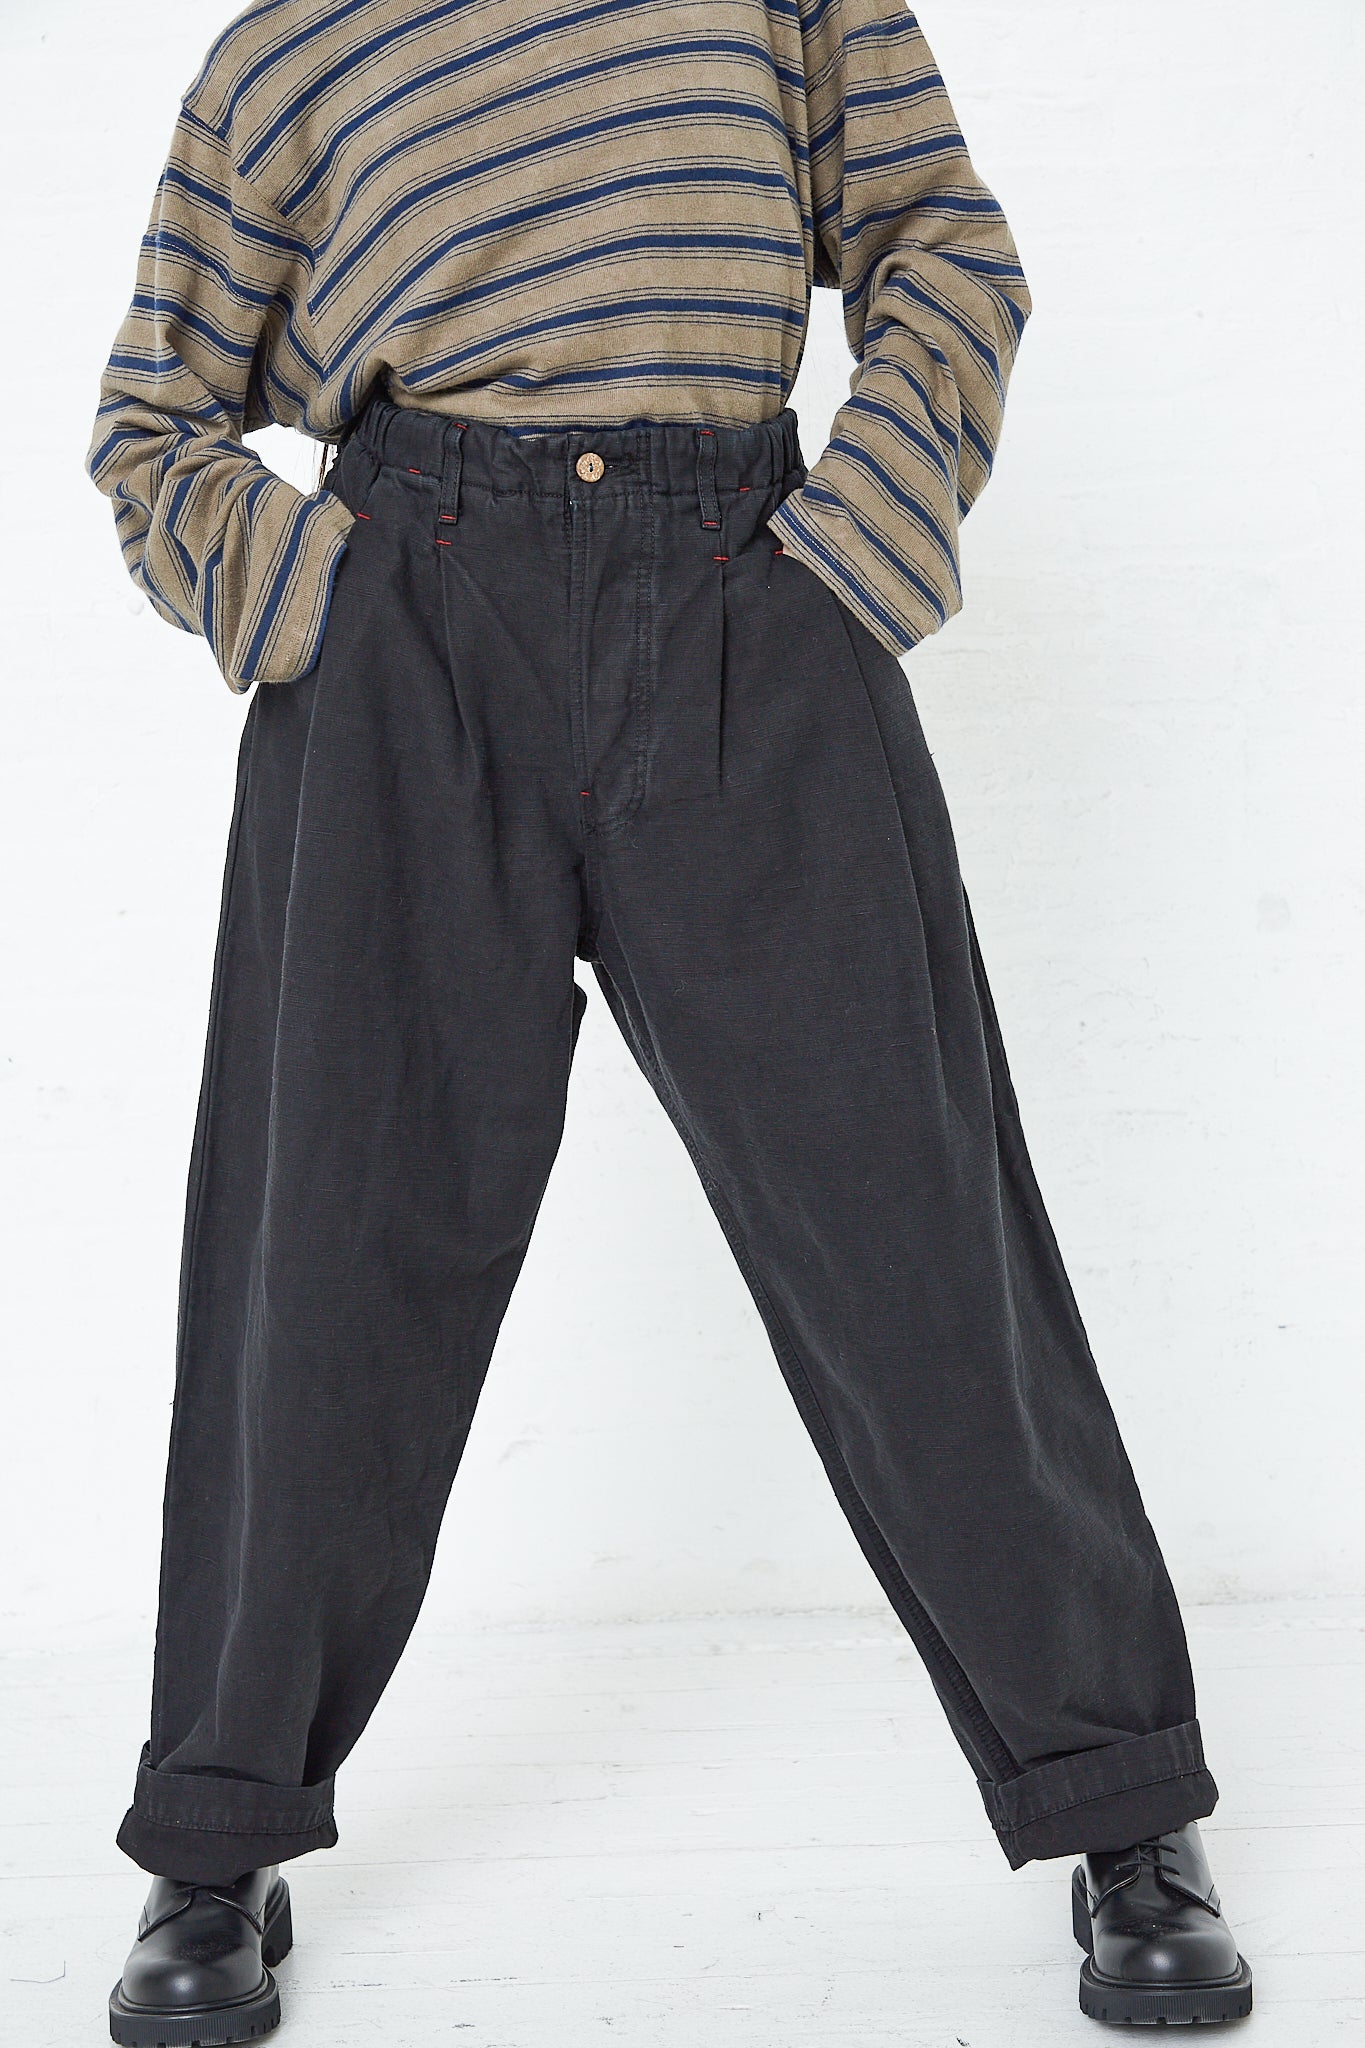 A woman wearing a striped shirt and the Dr. Collectors 9 oz. Cotton and Hemp P40 Z Boys Military Pant in Sulfur Black with an elasticated waistband.